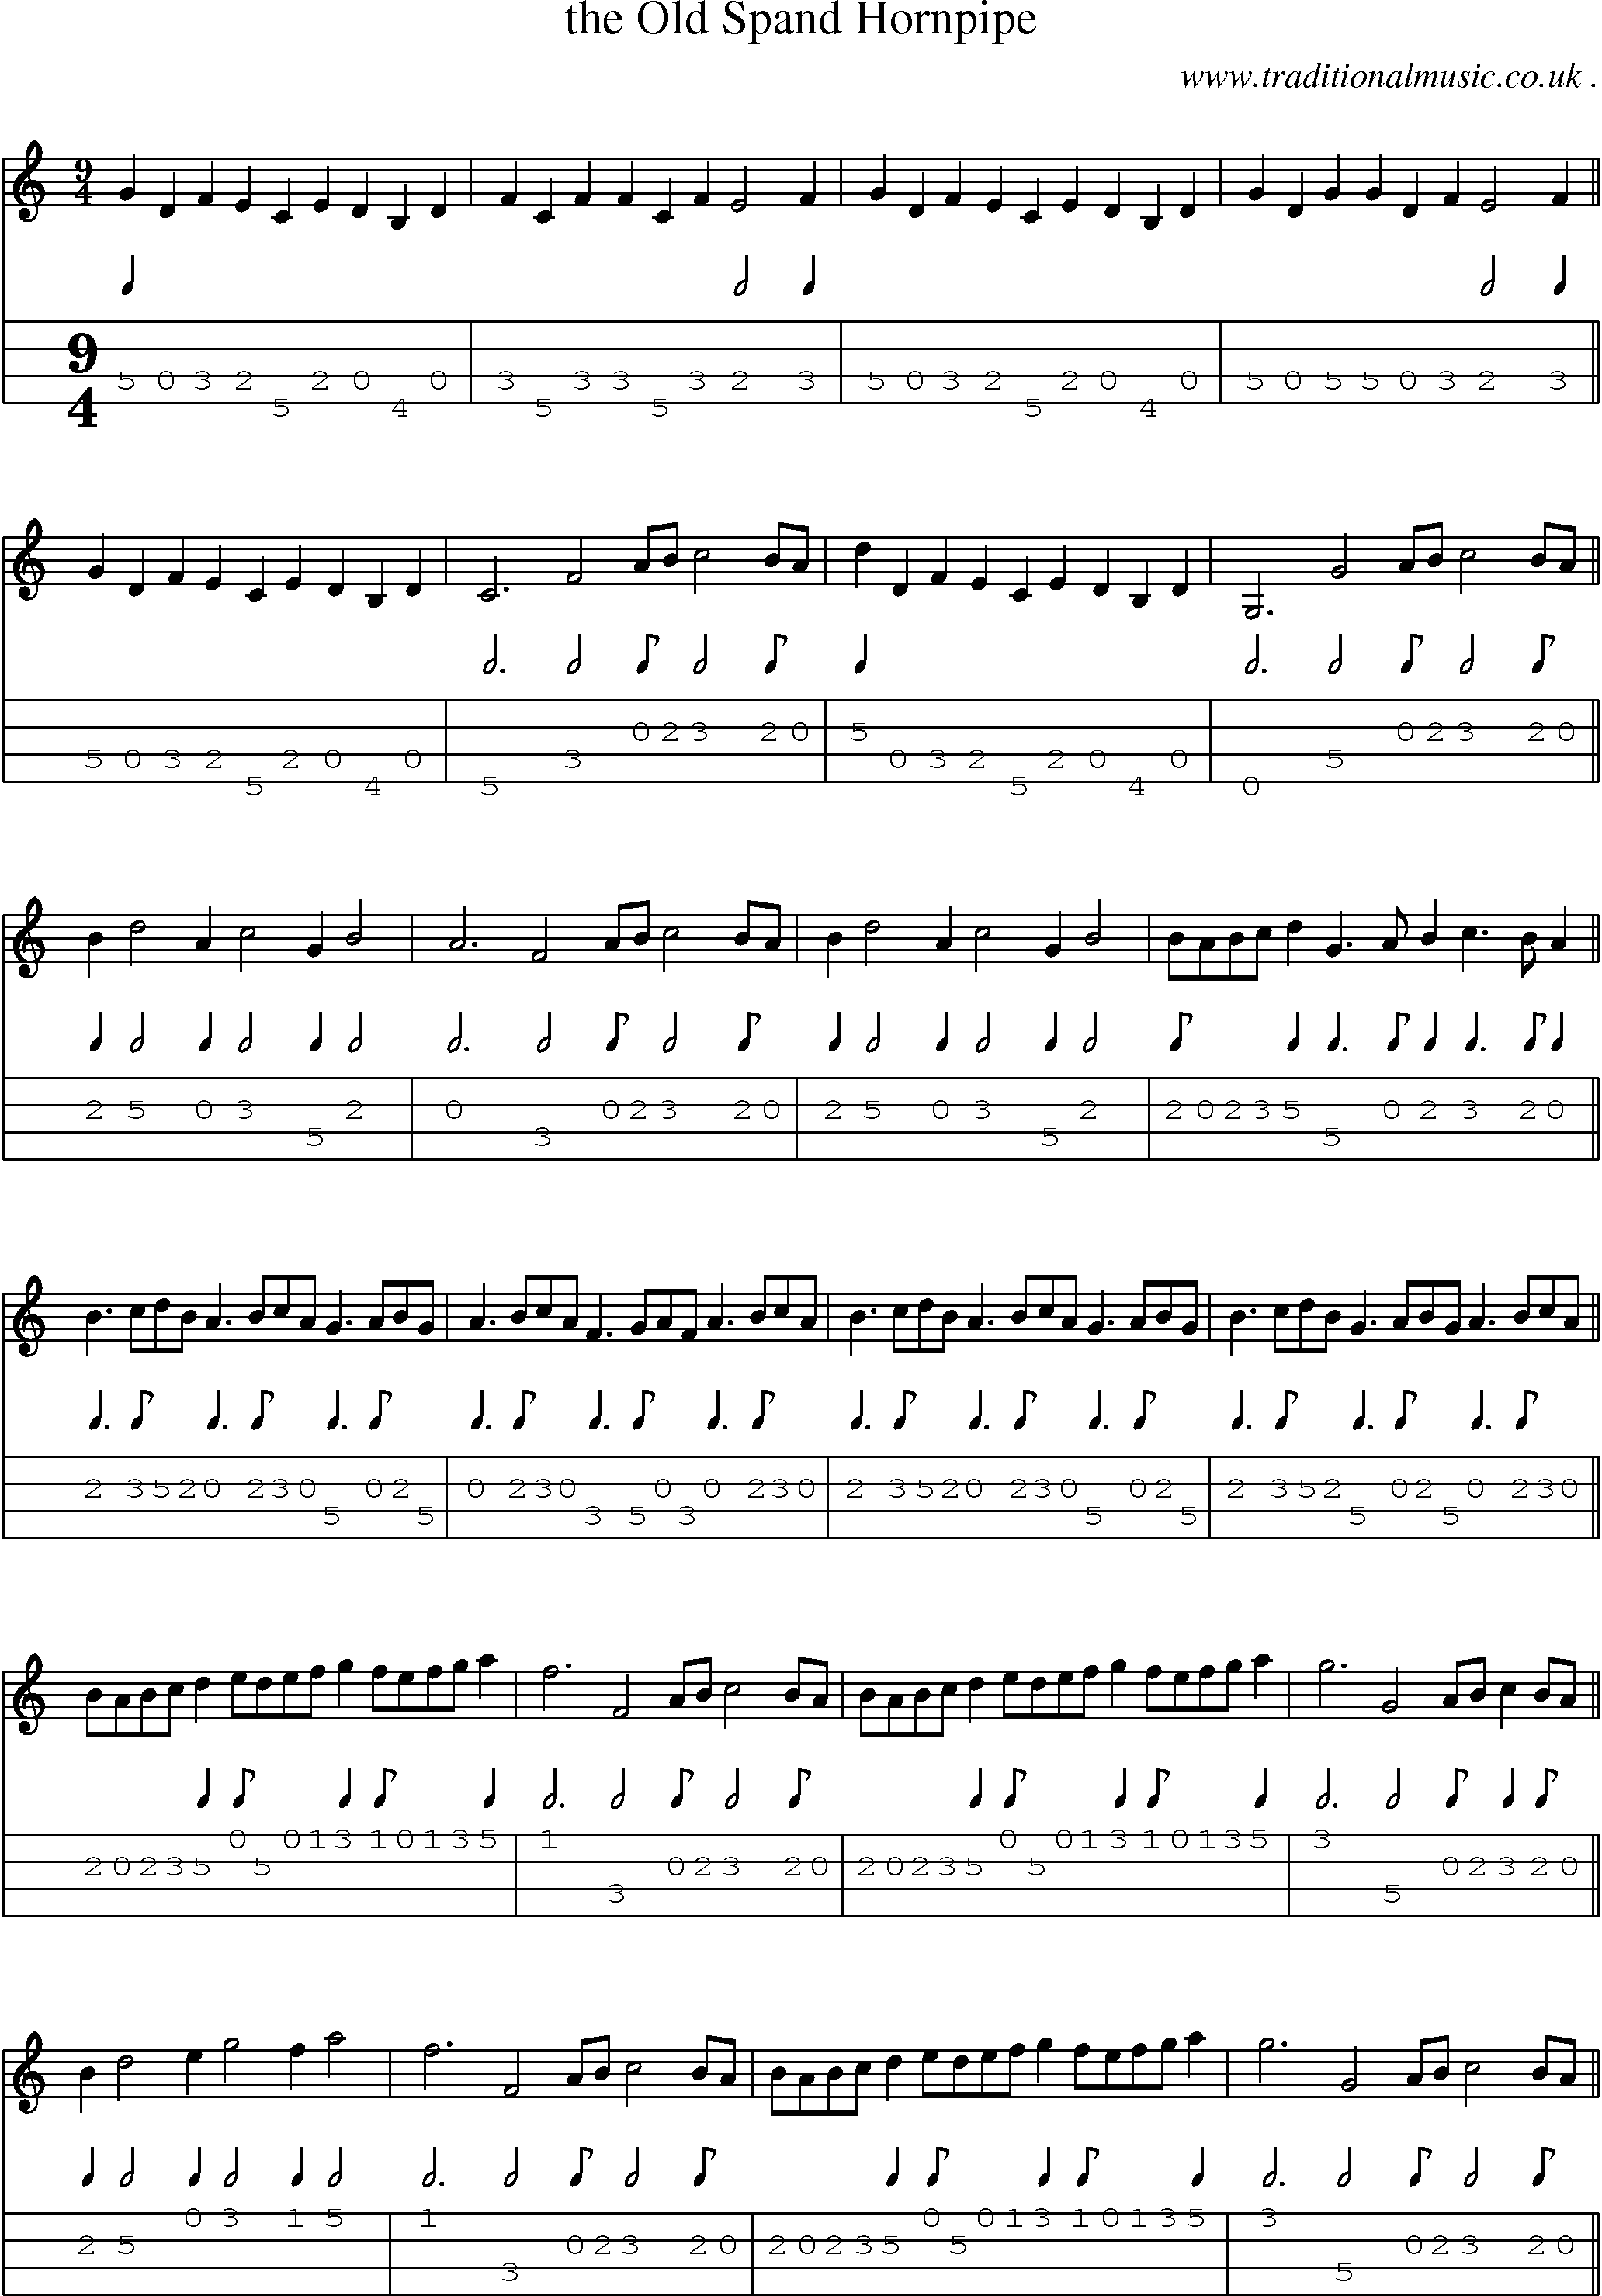 Sheet-Music and Mandolin Tabs for The Old Spand Hornpipe